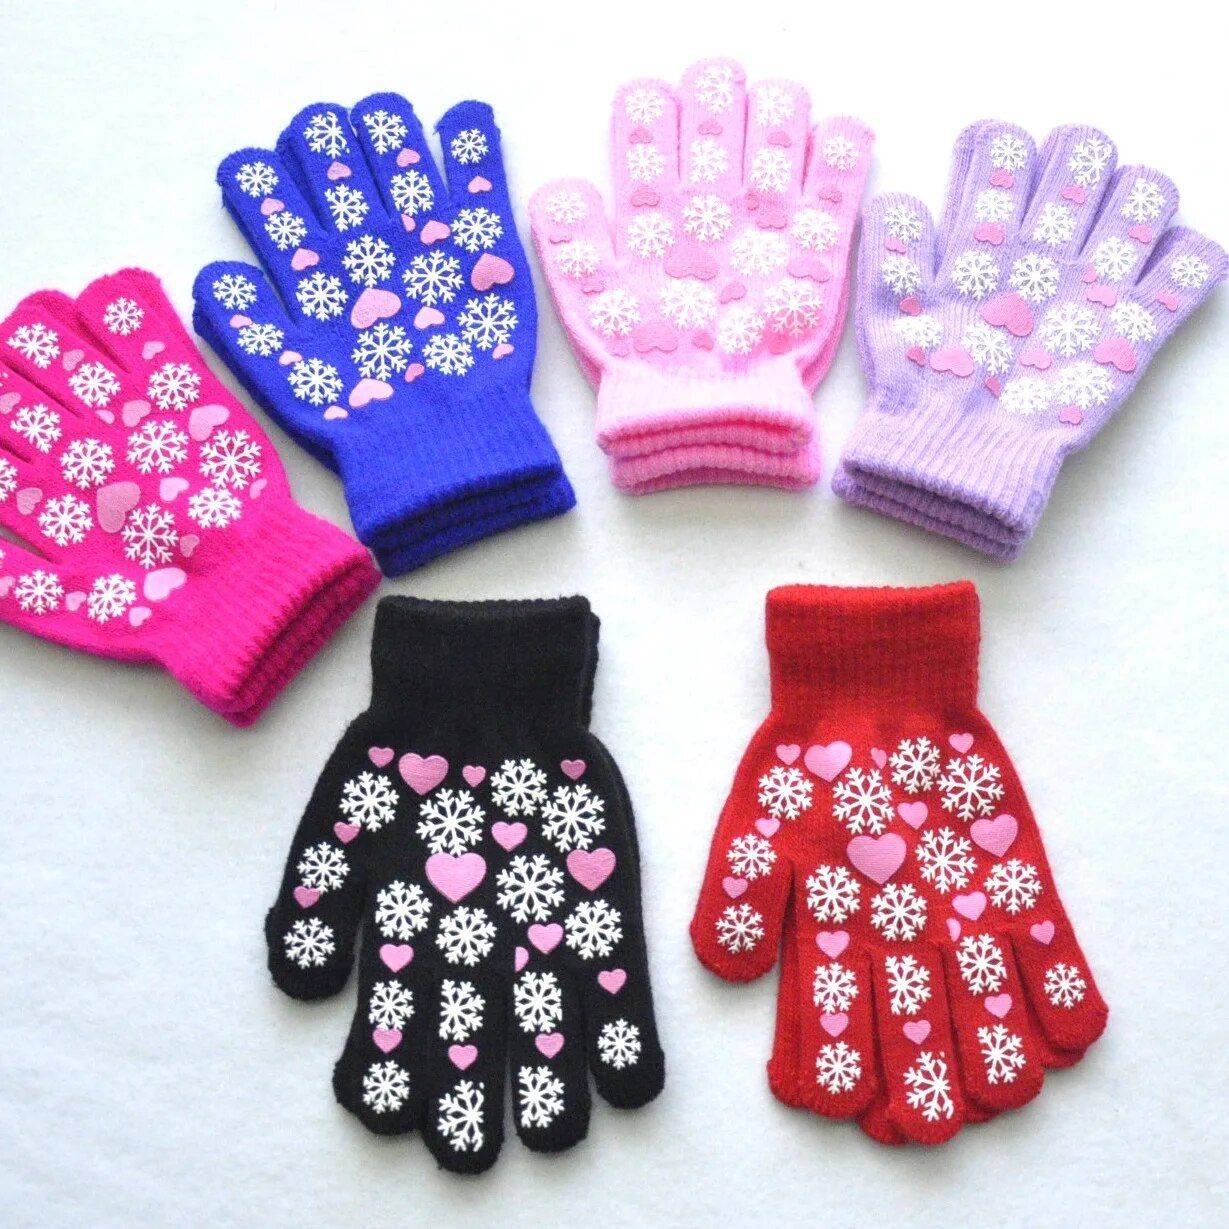 Warm Knitted Gloves for Children – Winter Snowflake and Heart Print Mittens for Outdoor Activities Gloves & Mittens